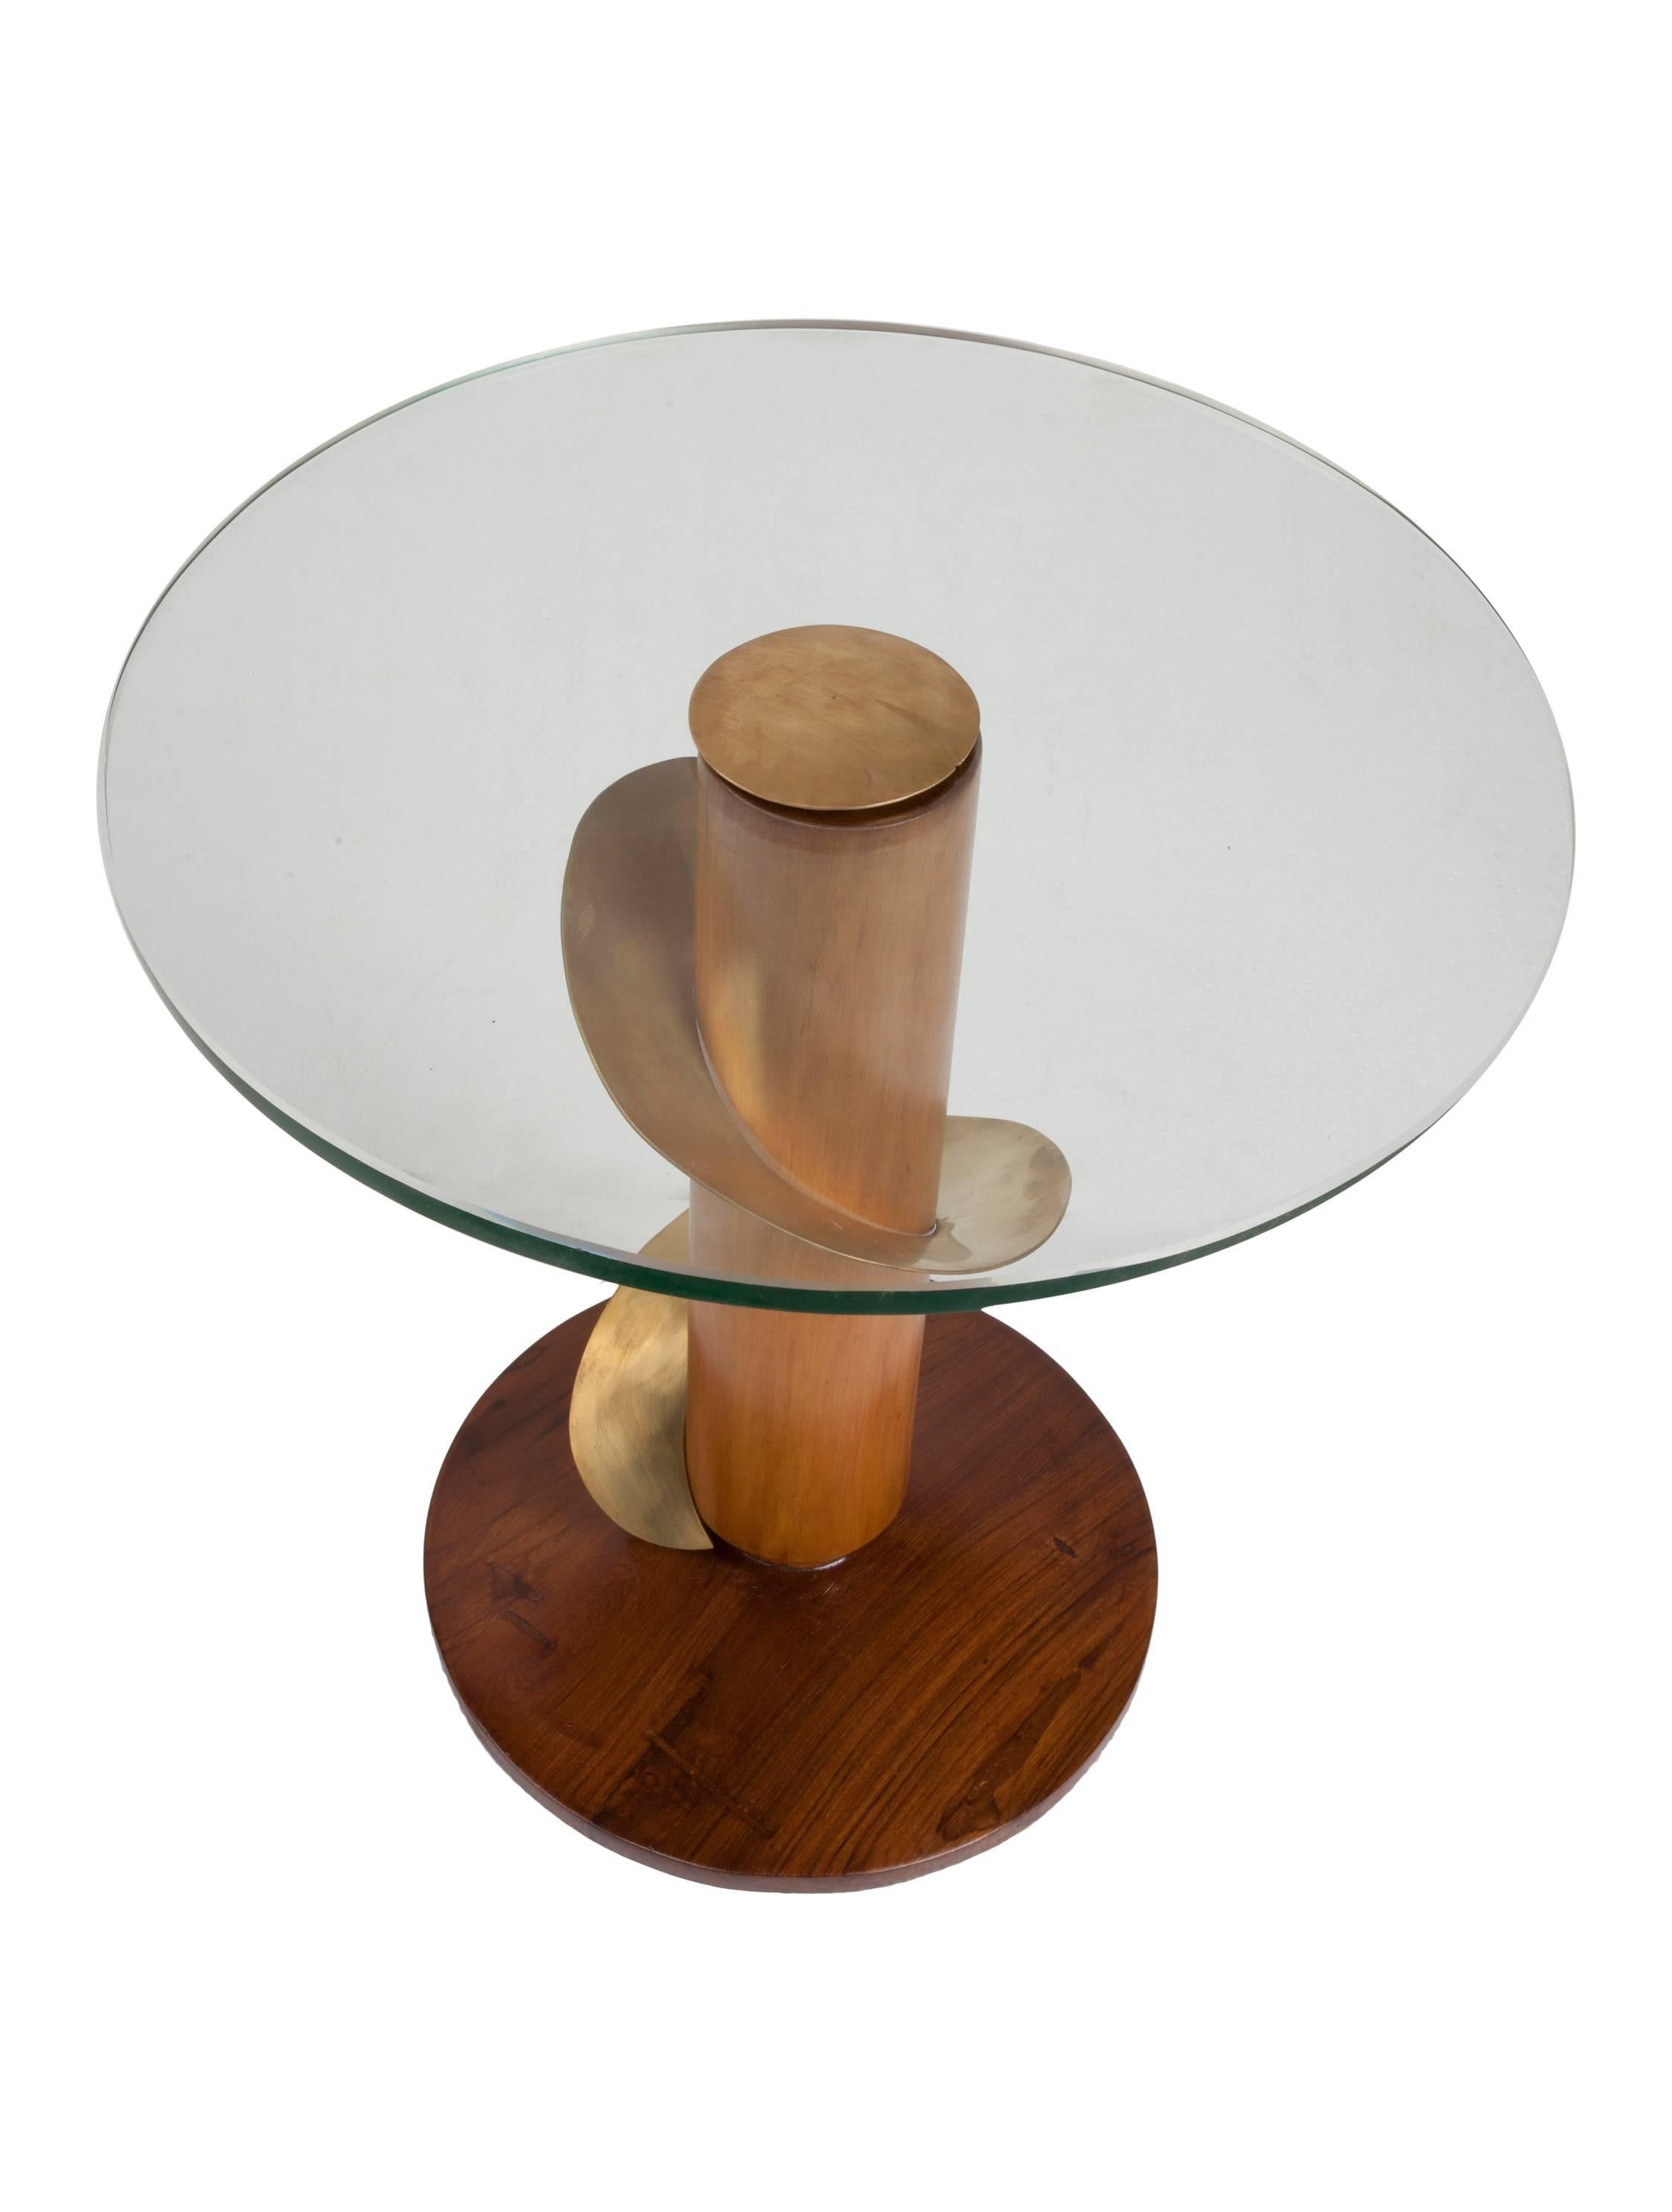 Teak and brass side tables with a swirl of brass around the stem and glass tops. Glass piece can be removed by taking off the brass center piece. Diameter of the base is 12 inches. Mid-Century Modern.

Mid-Century Modern pieces located on